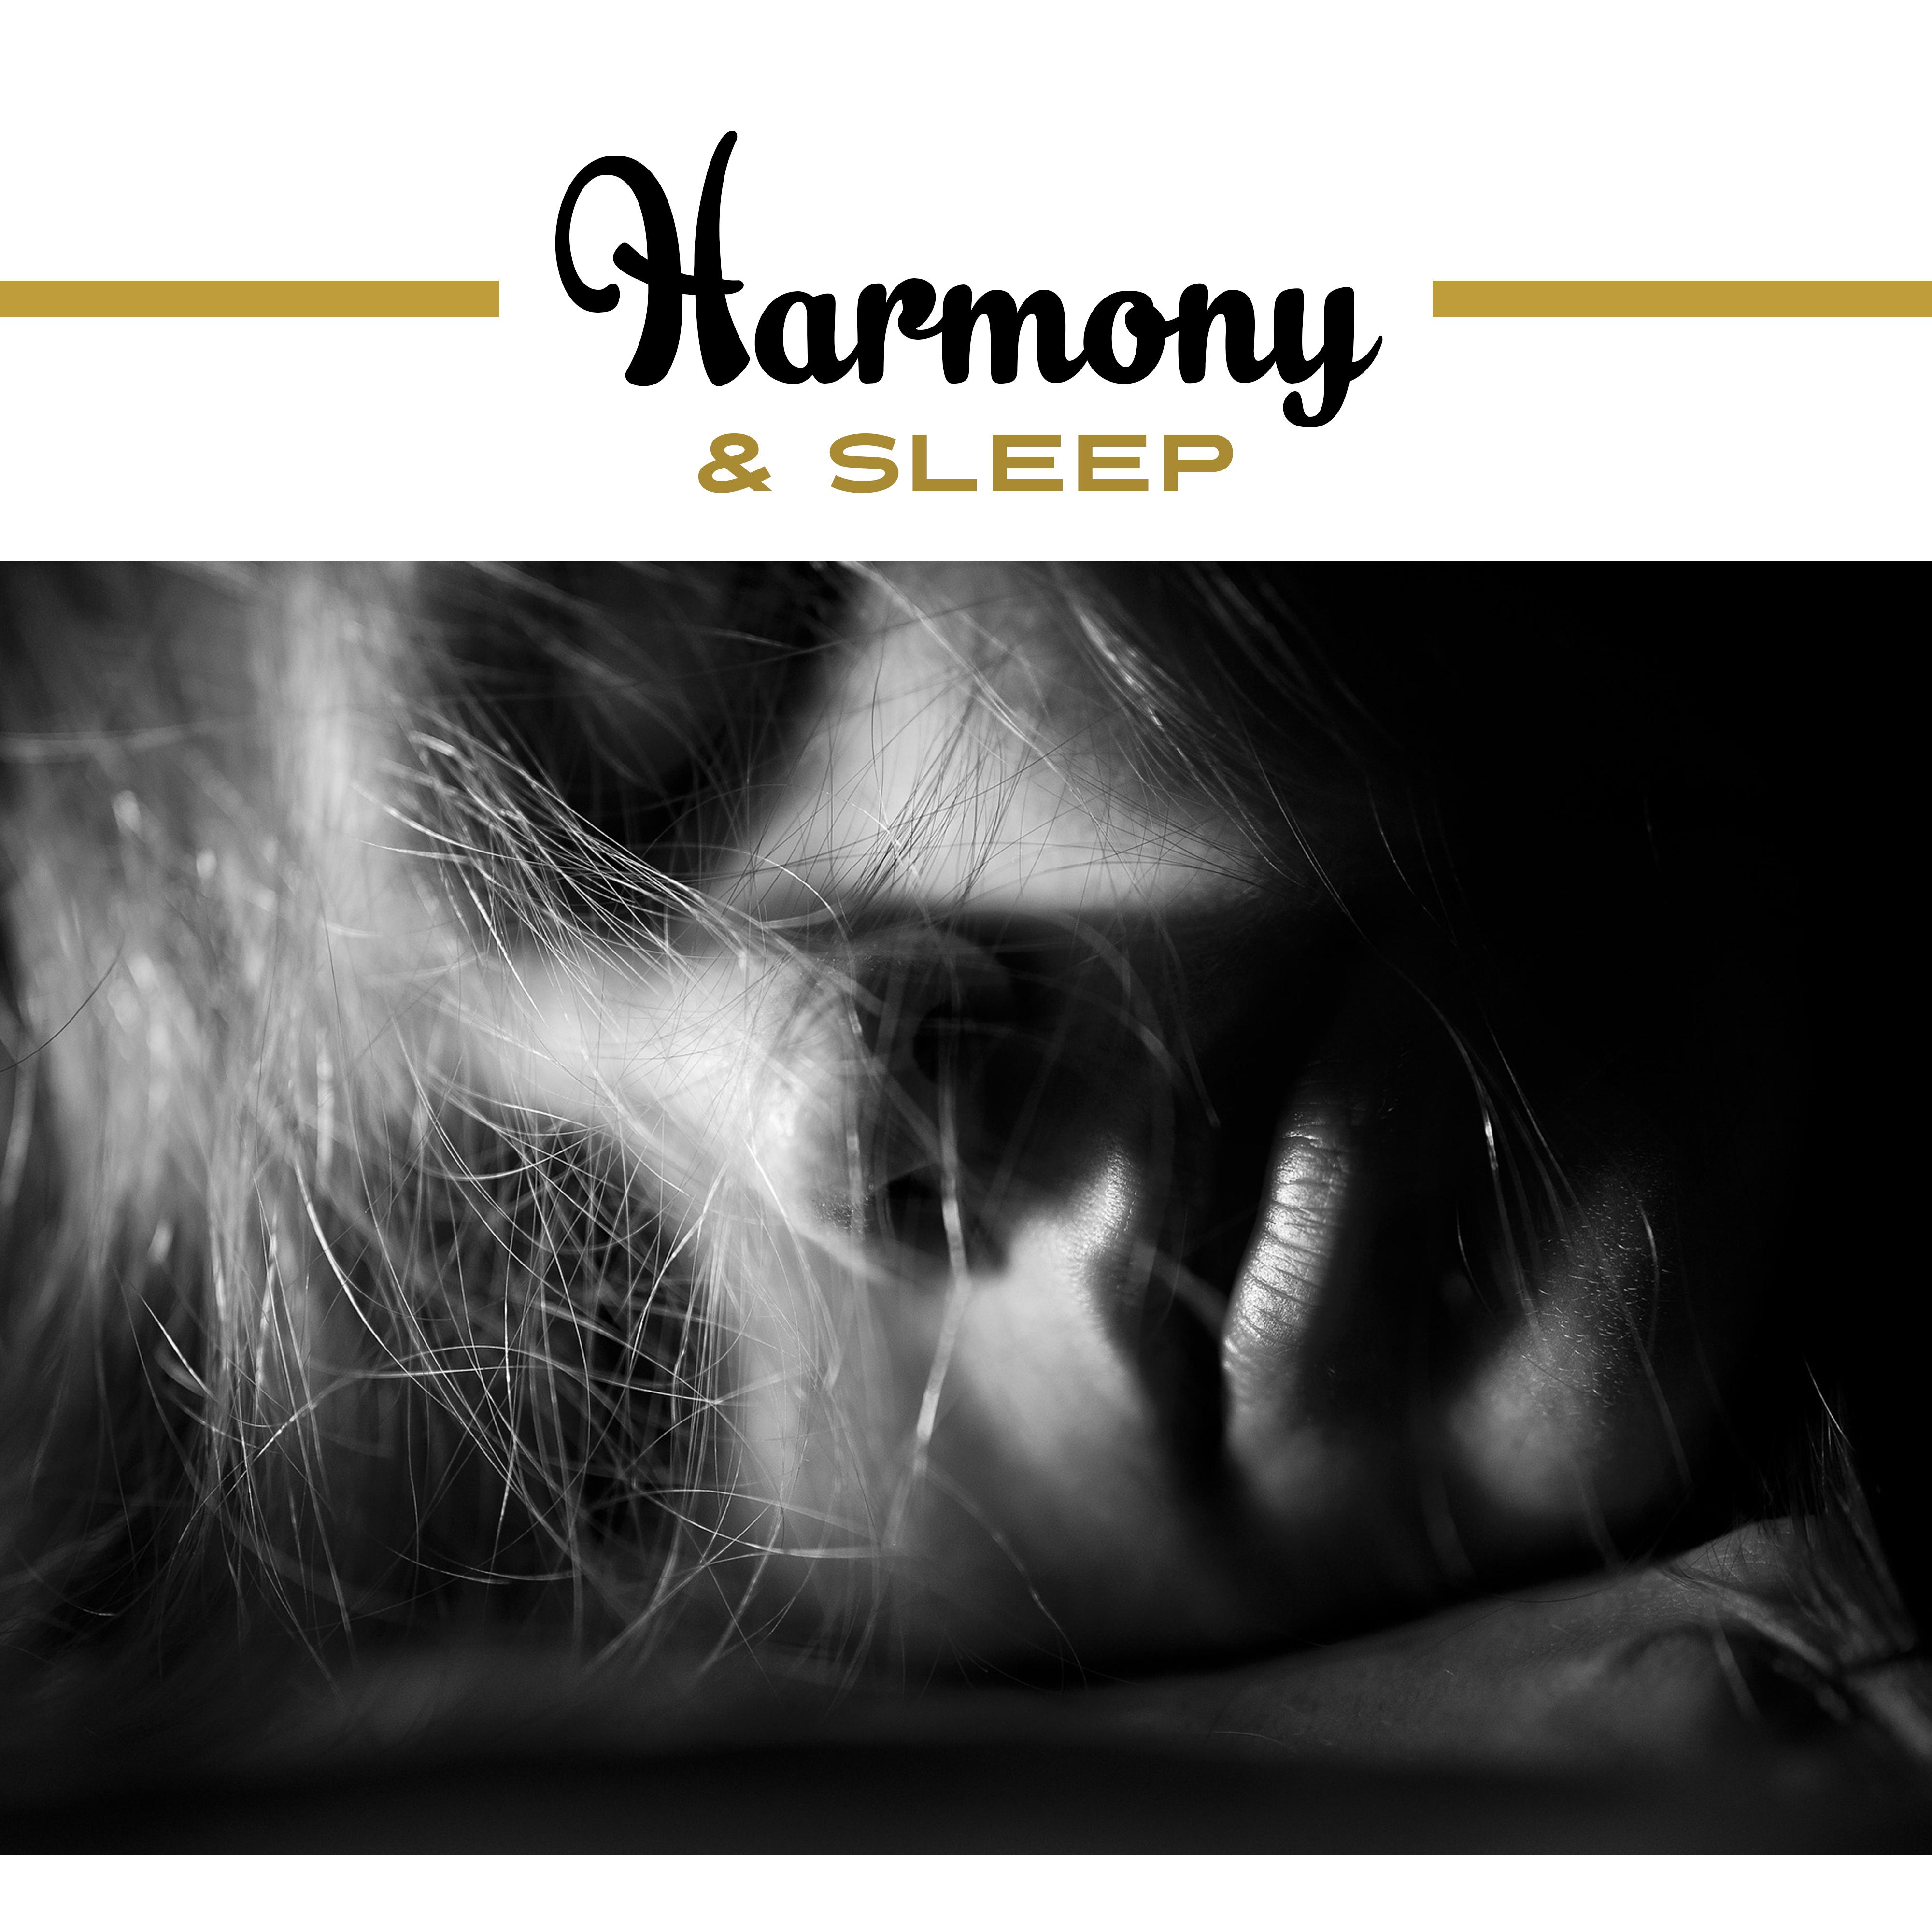 Harmony & Sleep – Sweet Dreams at Goodnight, Calm Lullaby, Relaxation, Bedtime, Soft Sounds for Sleep, Music to Pillow